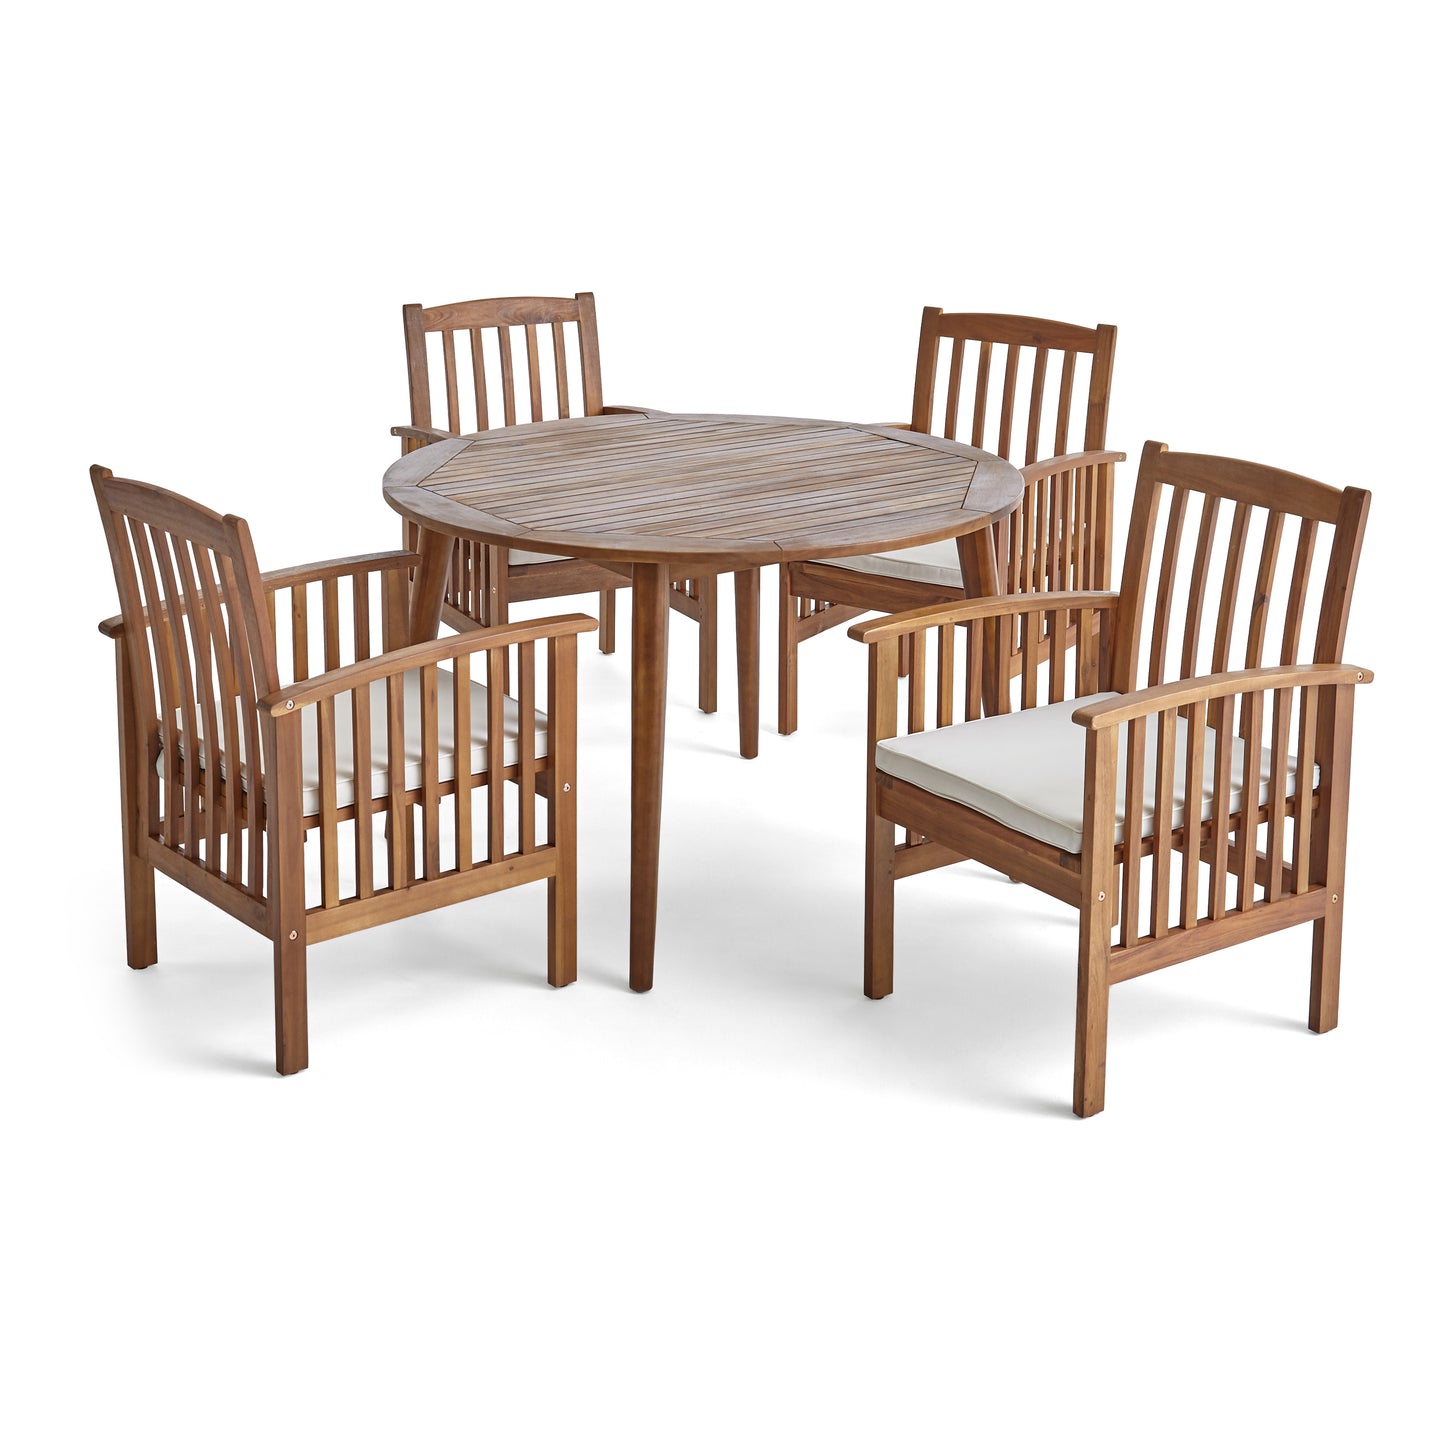 Phoenix Outdoor Acacia 4-Seater Dining Set with Cushions and 47" Round Table with Straight Legs